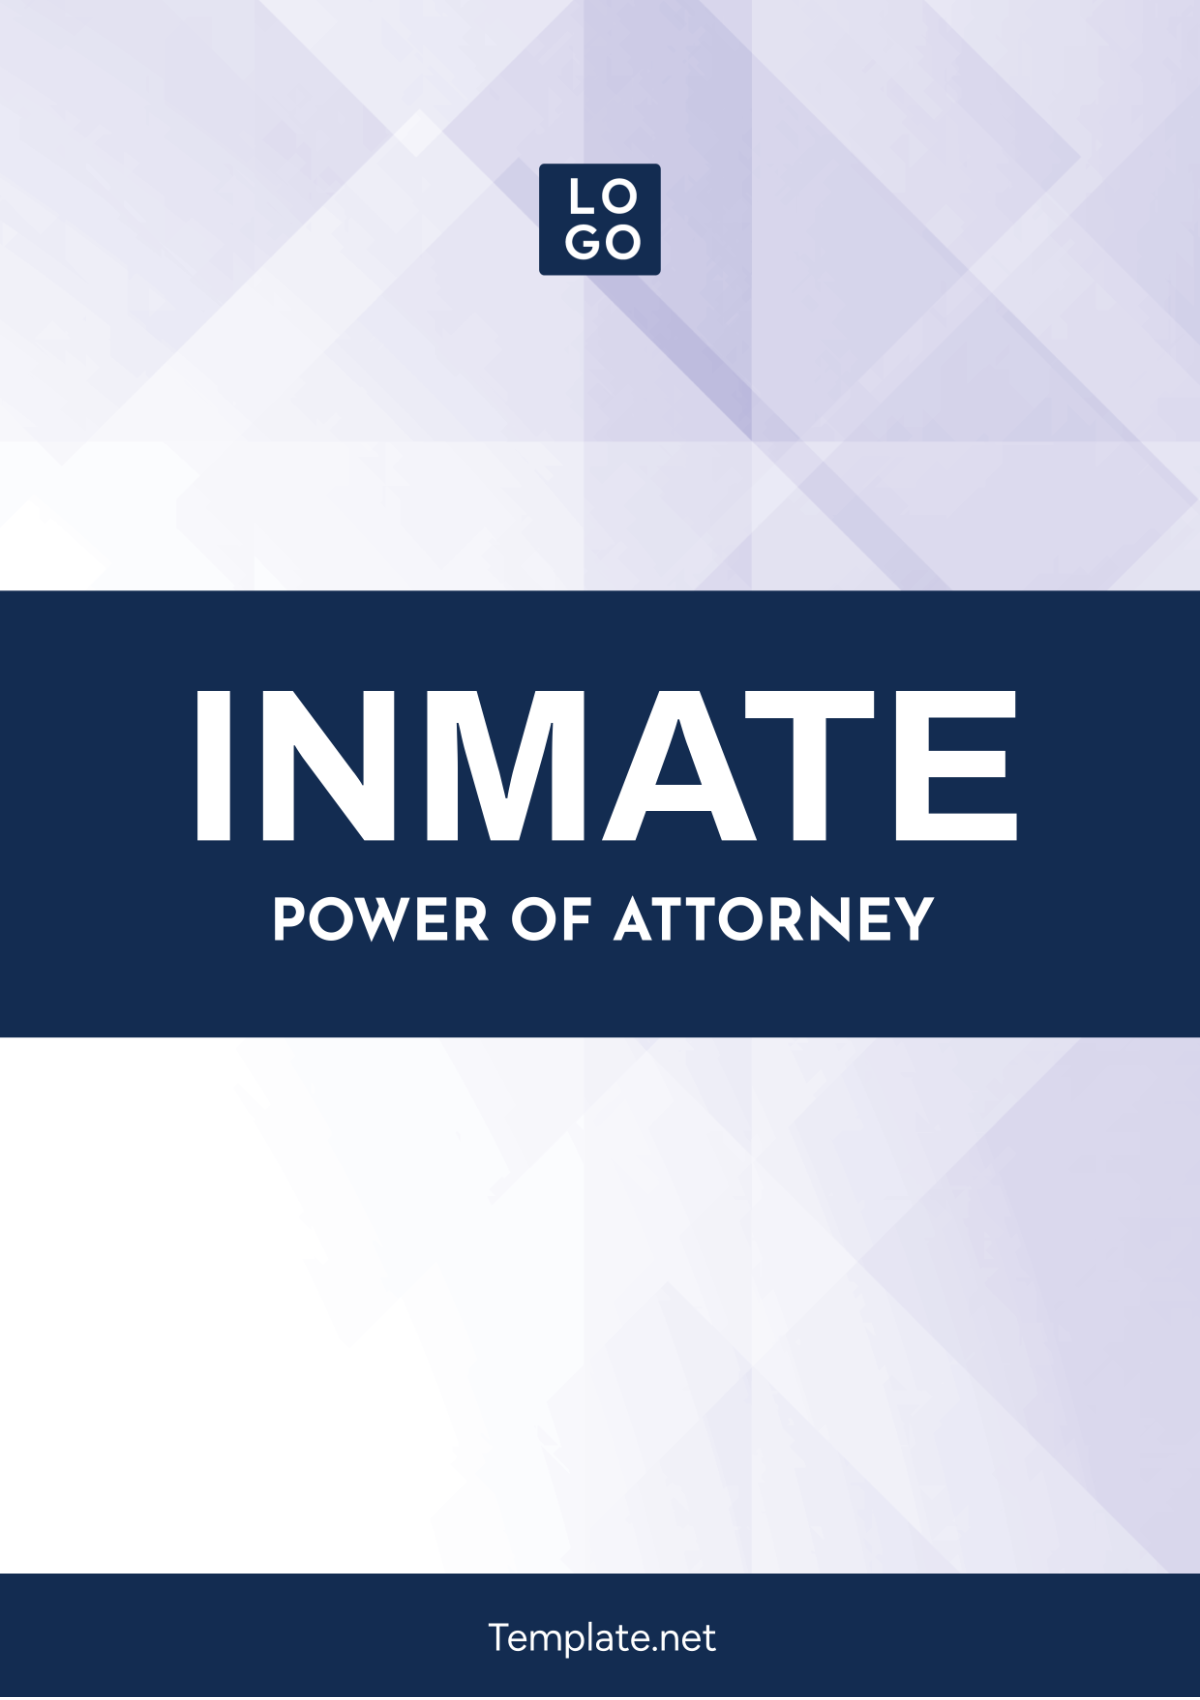 Inmate Power of Attorney Template